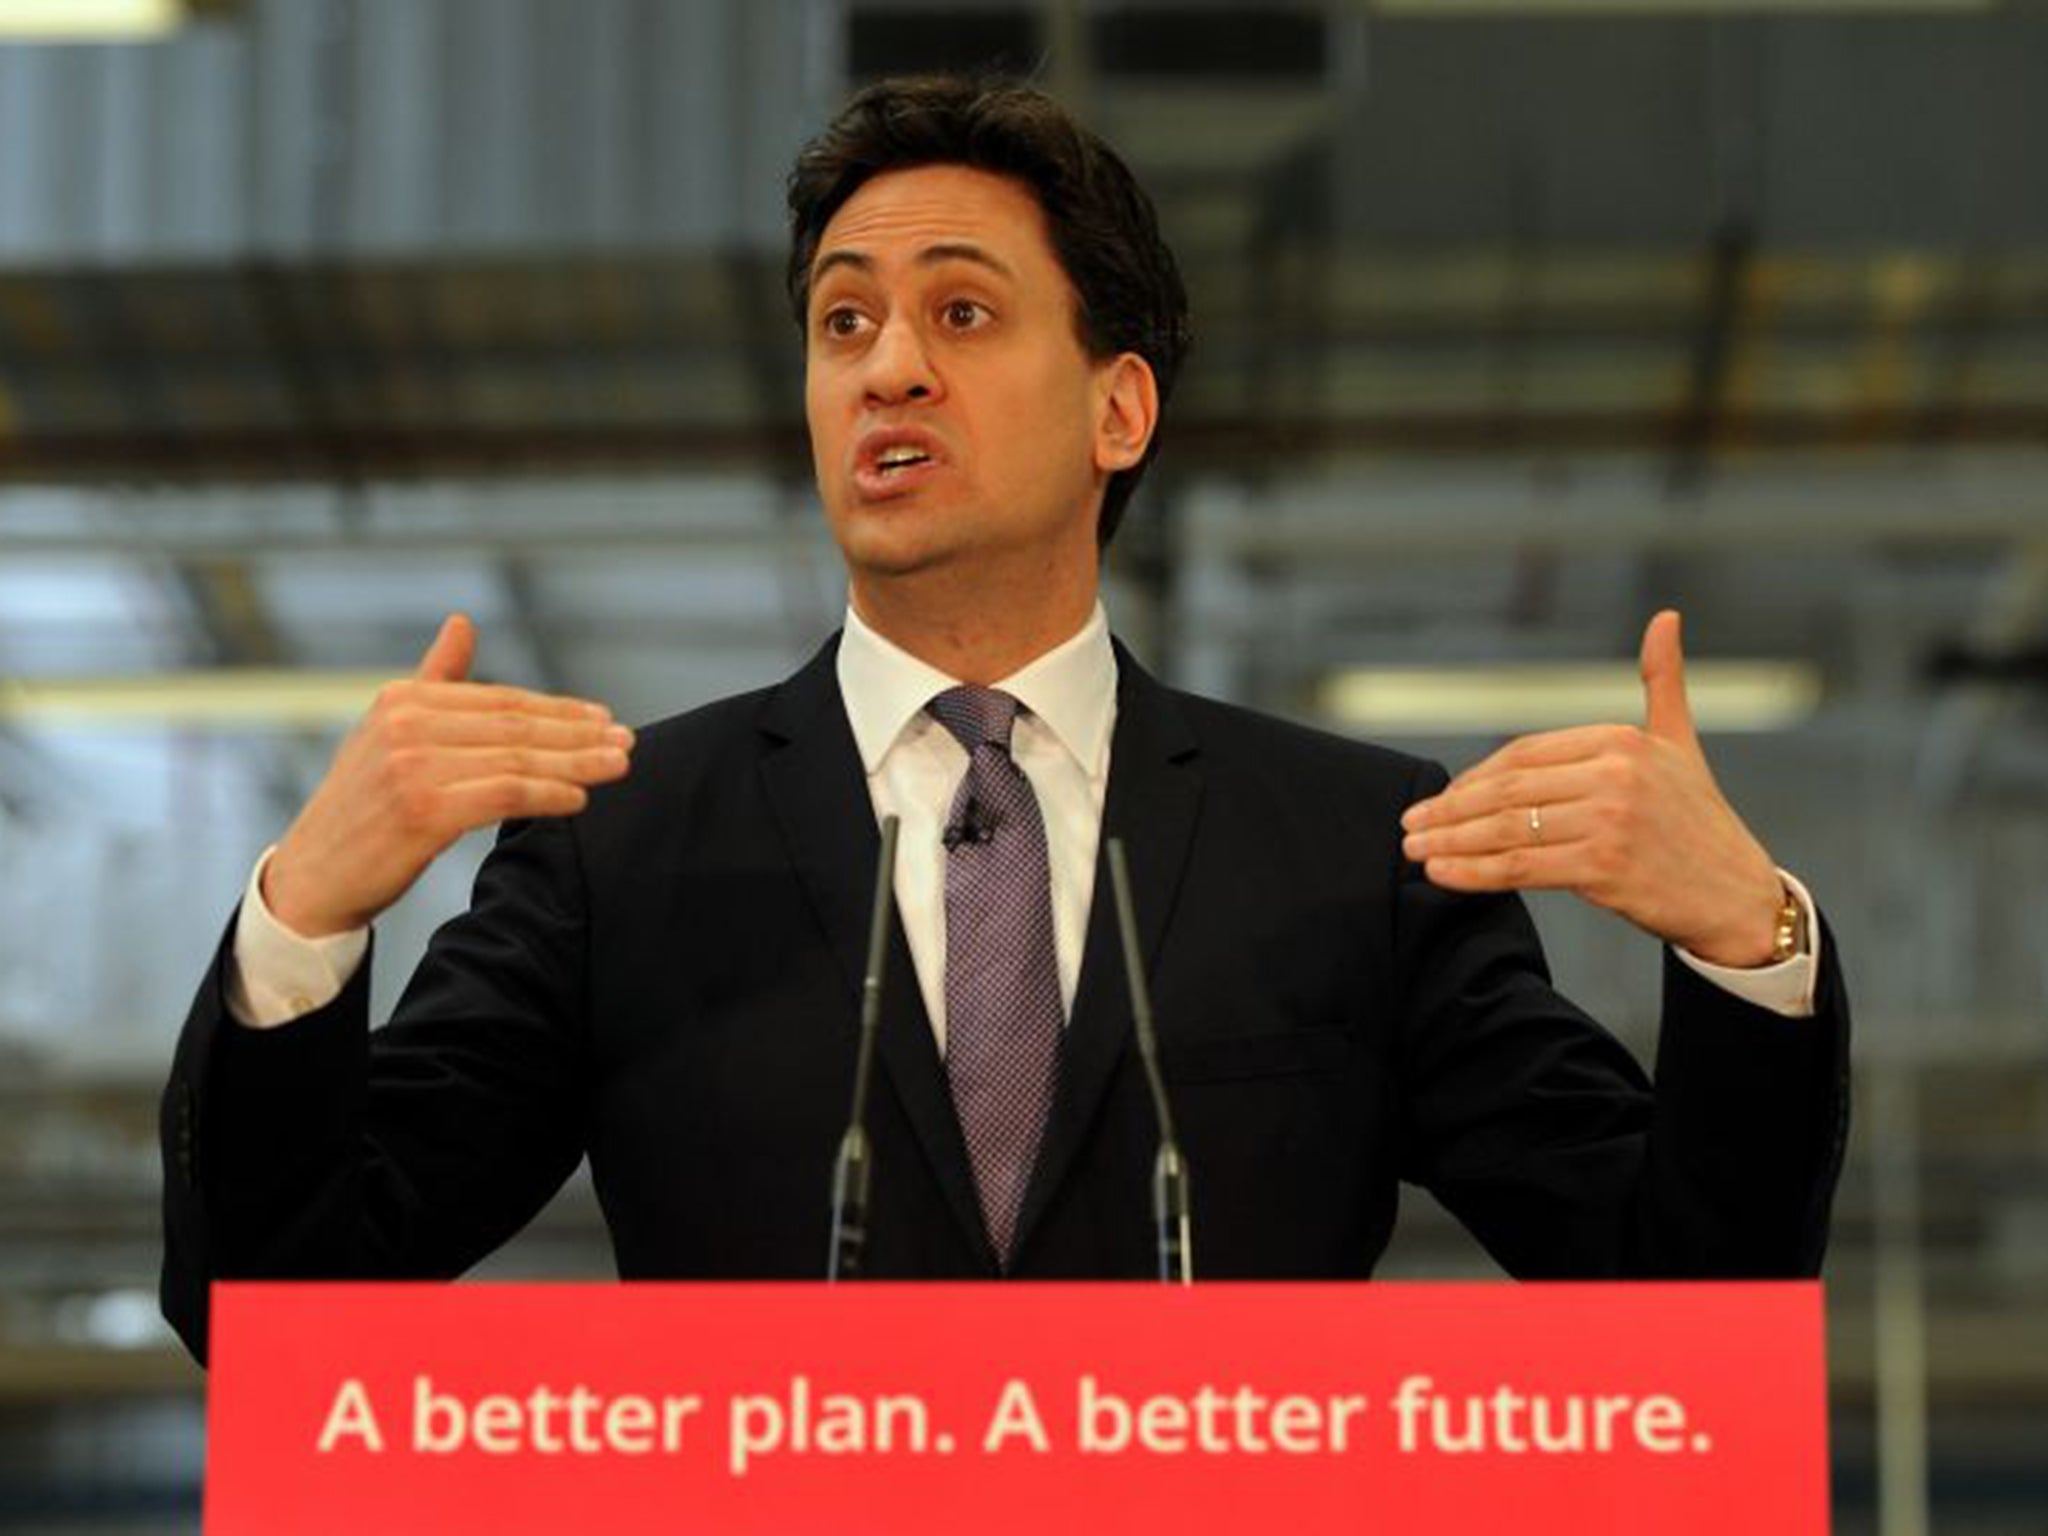 Ed Miliband has stressed the importance of everyone paying their fair share of tax